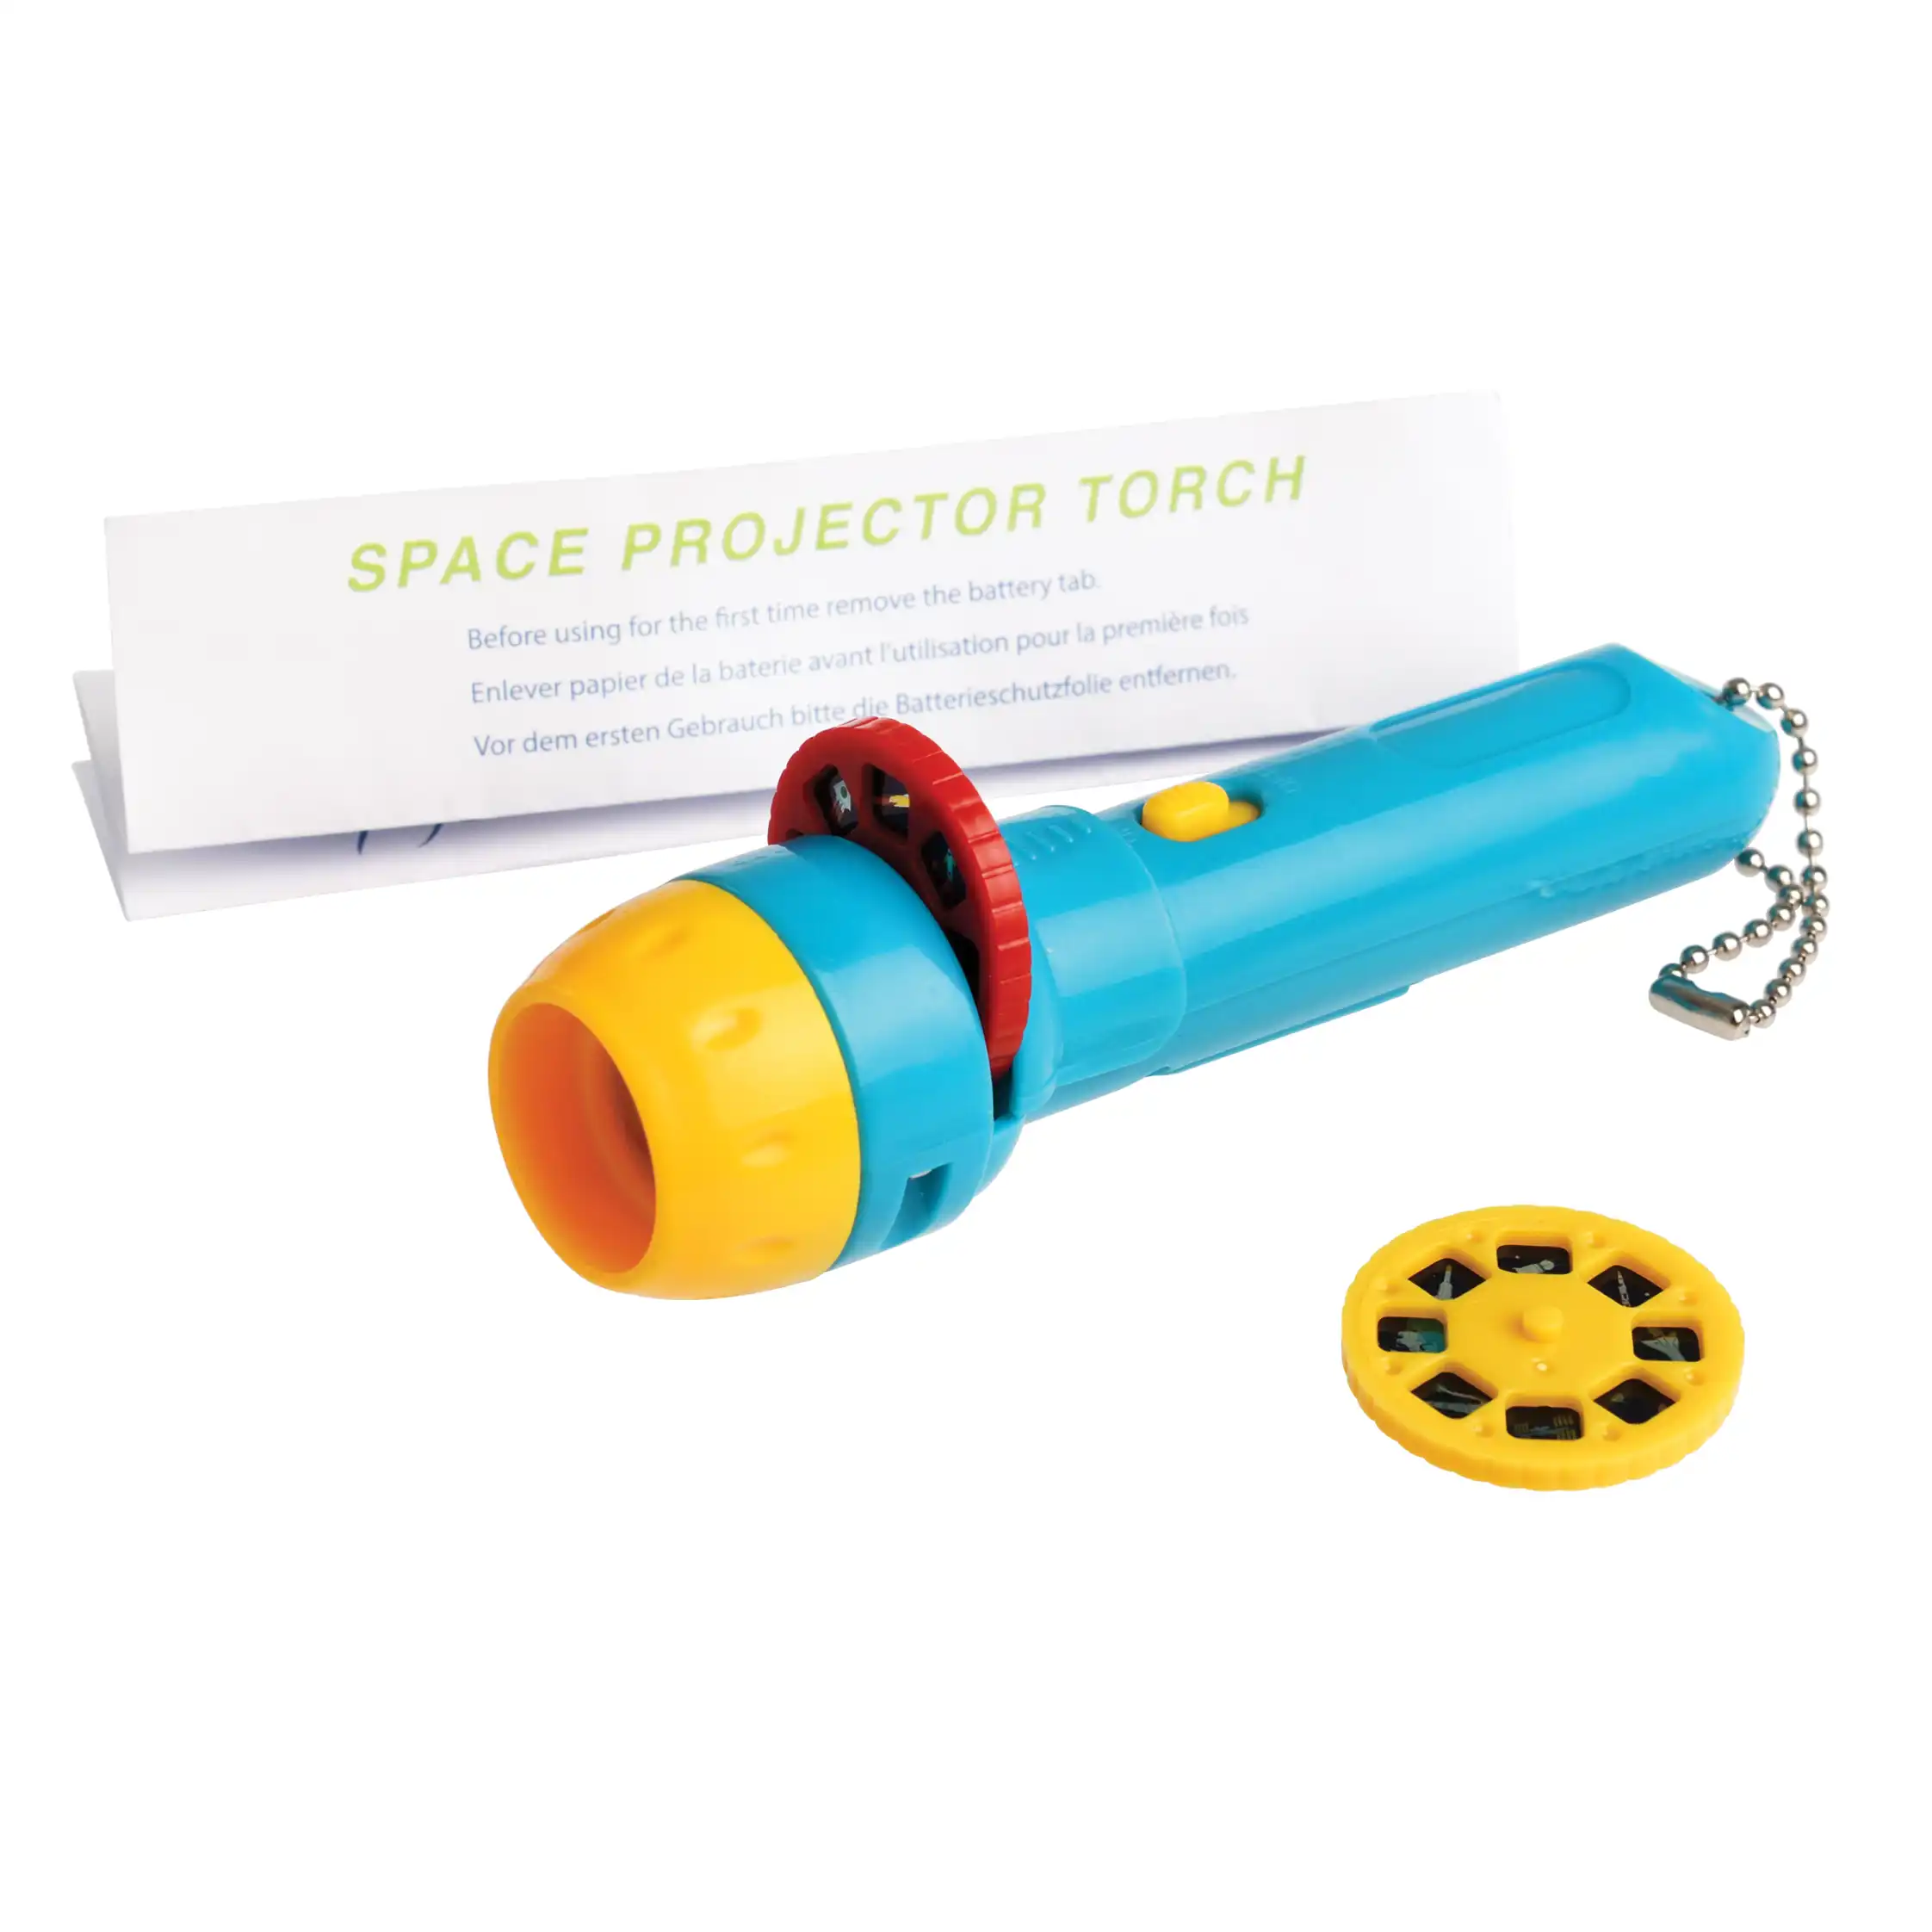 projector torch - space age